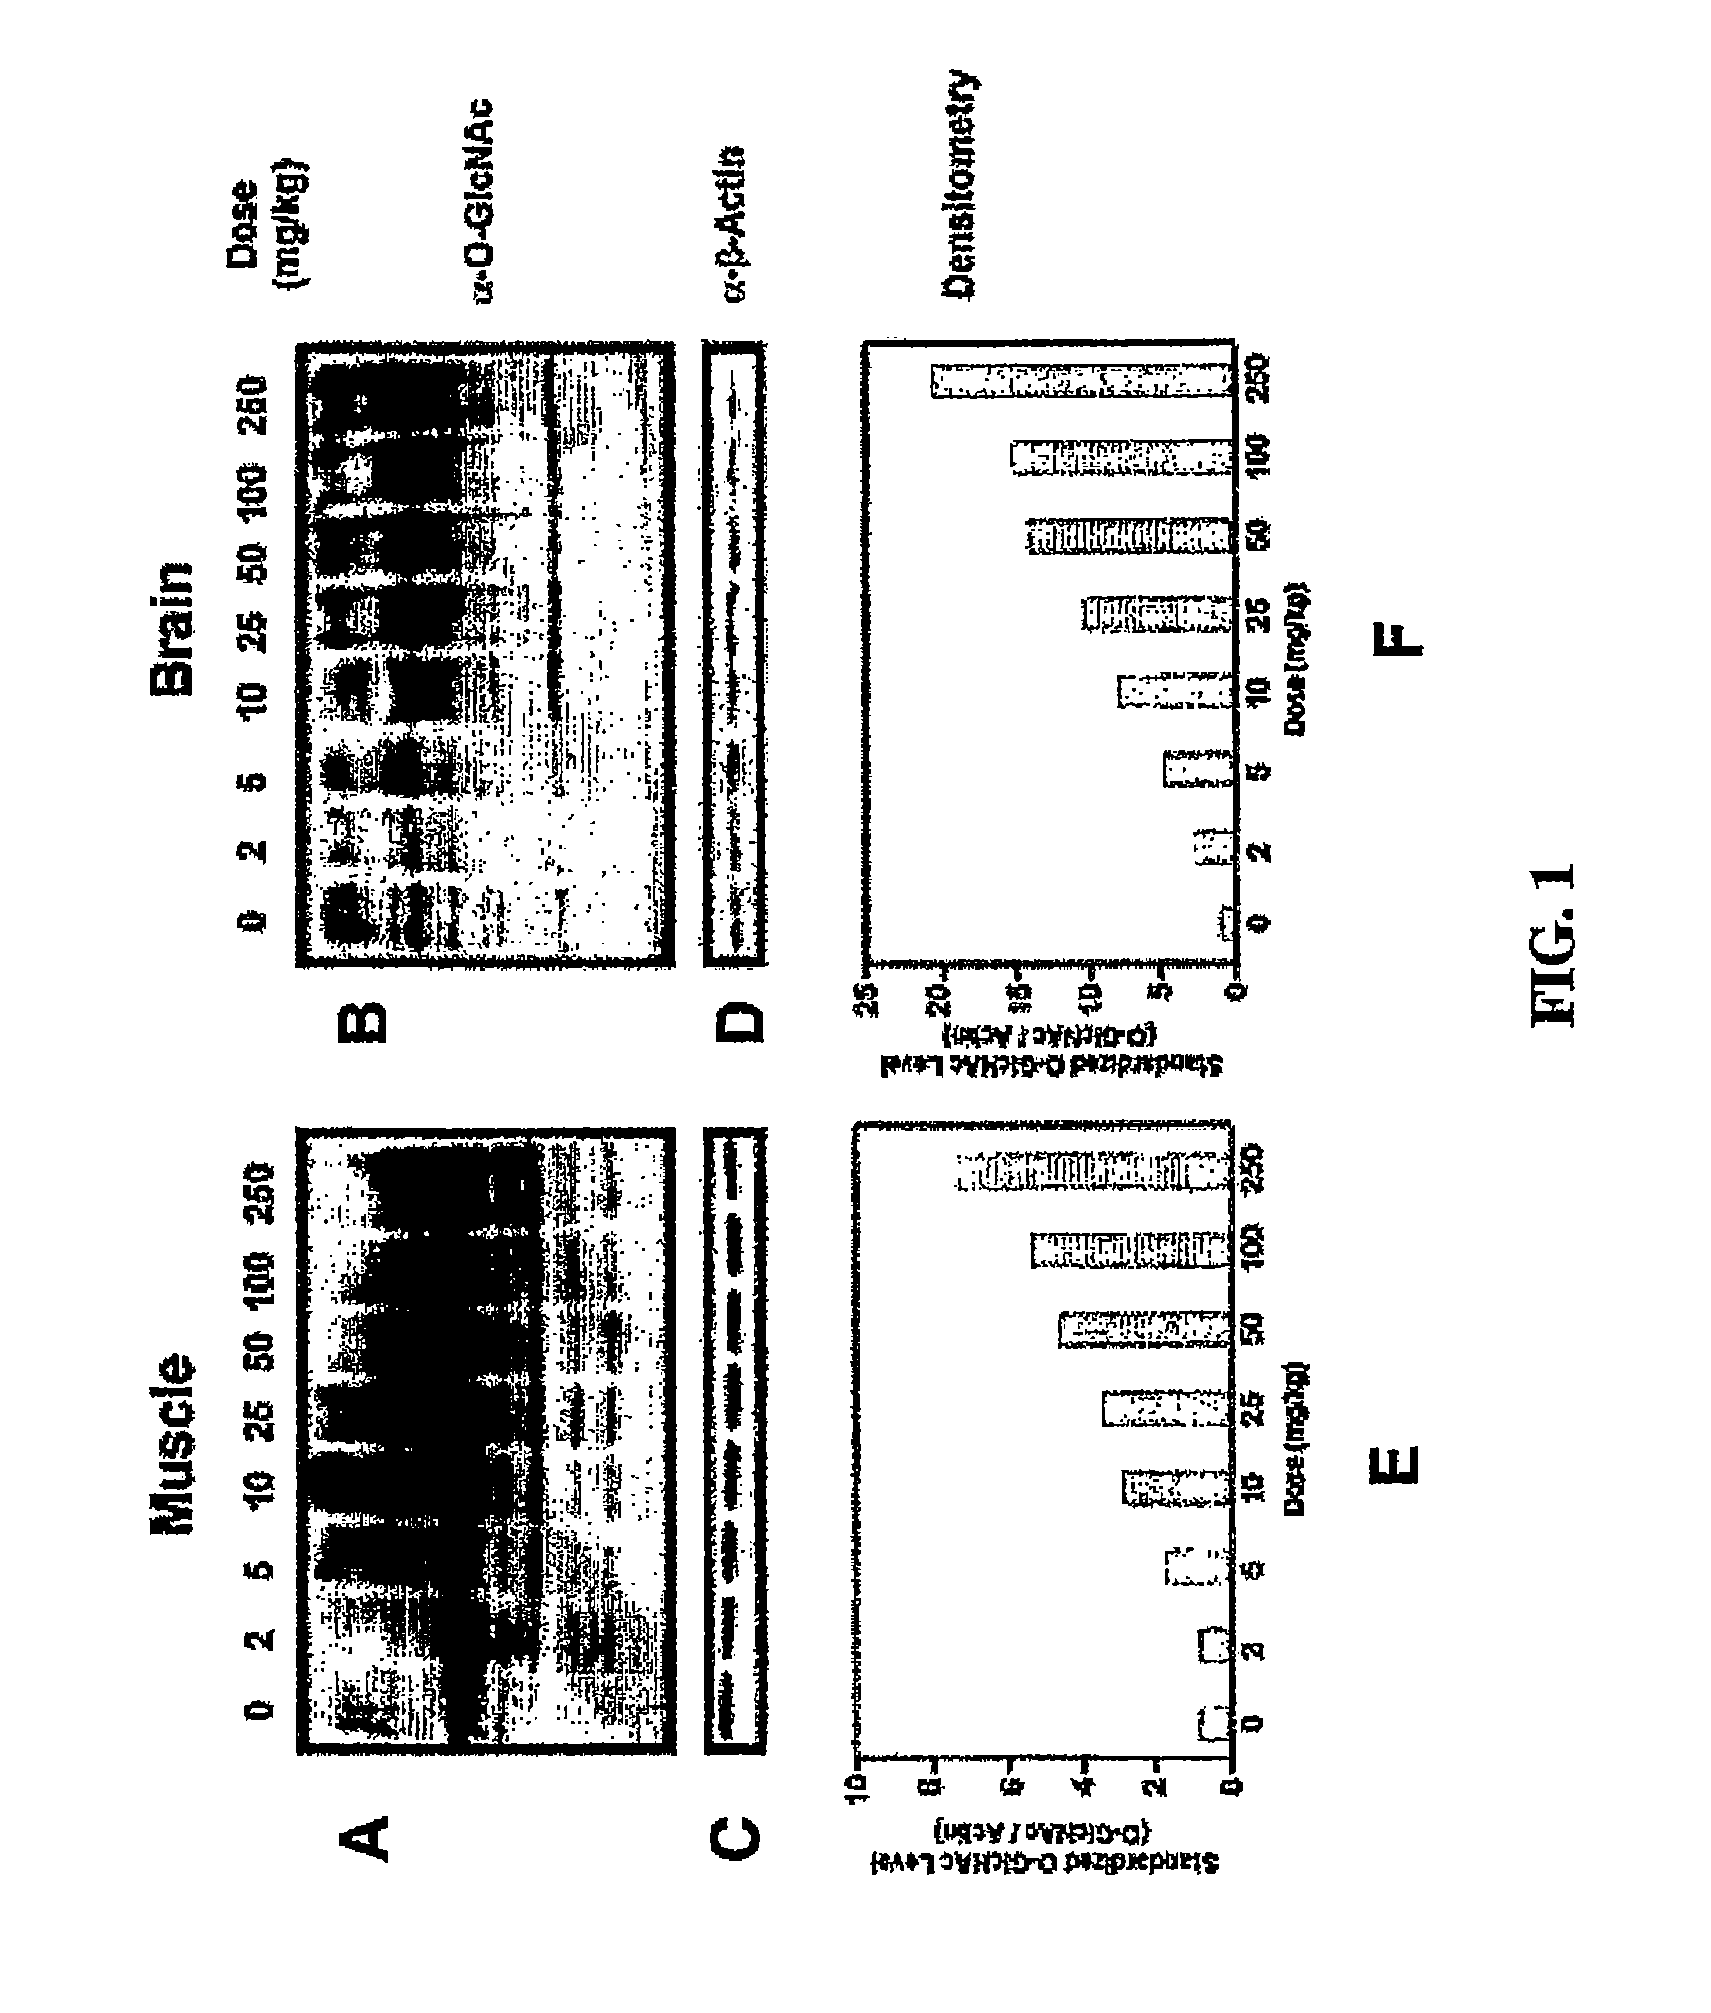 Selective glycosidase inhibitors and uses thereof